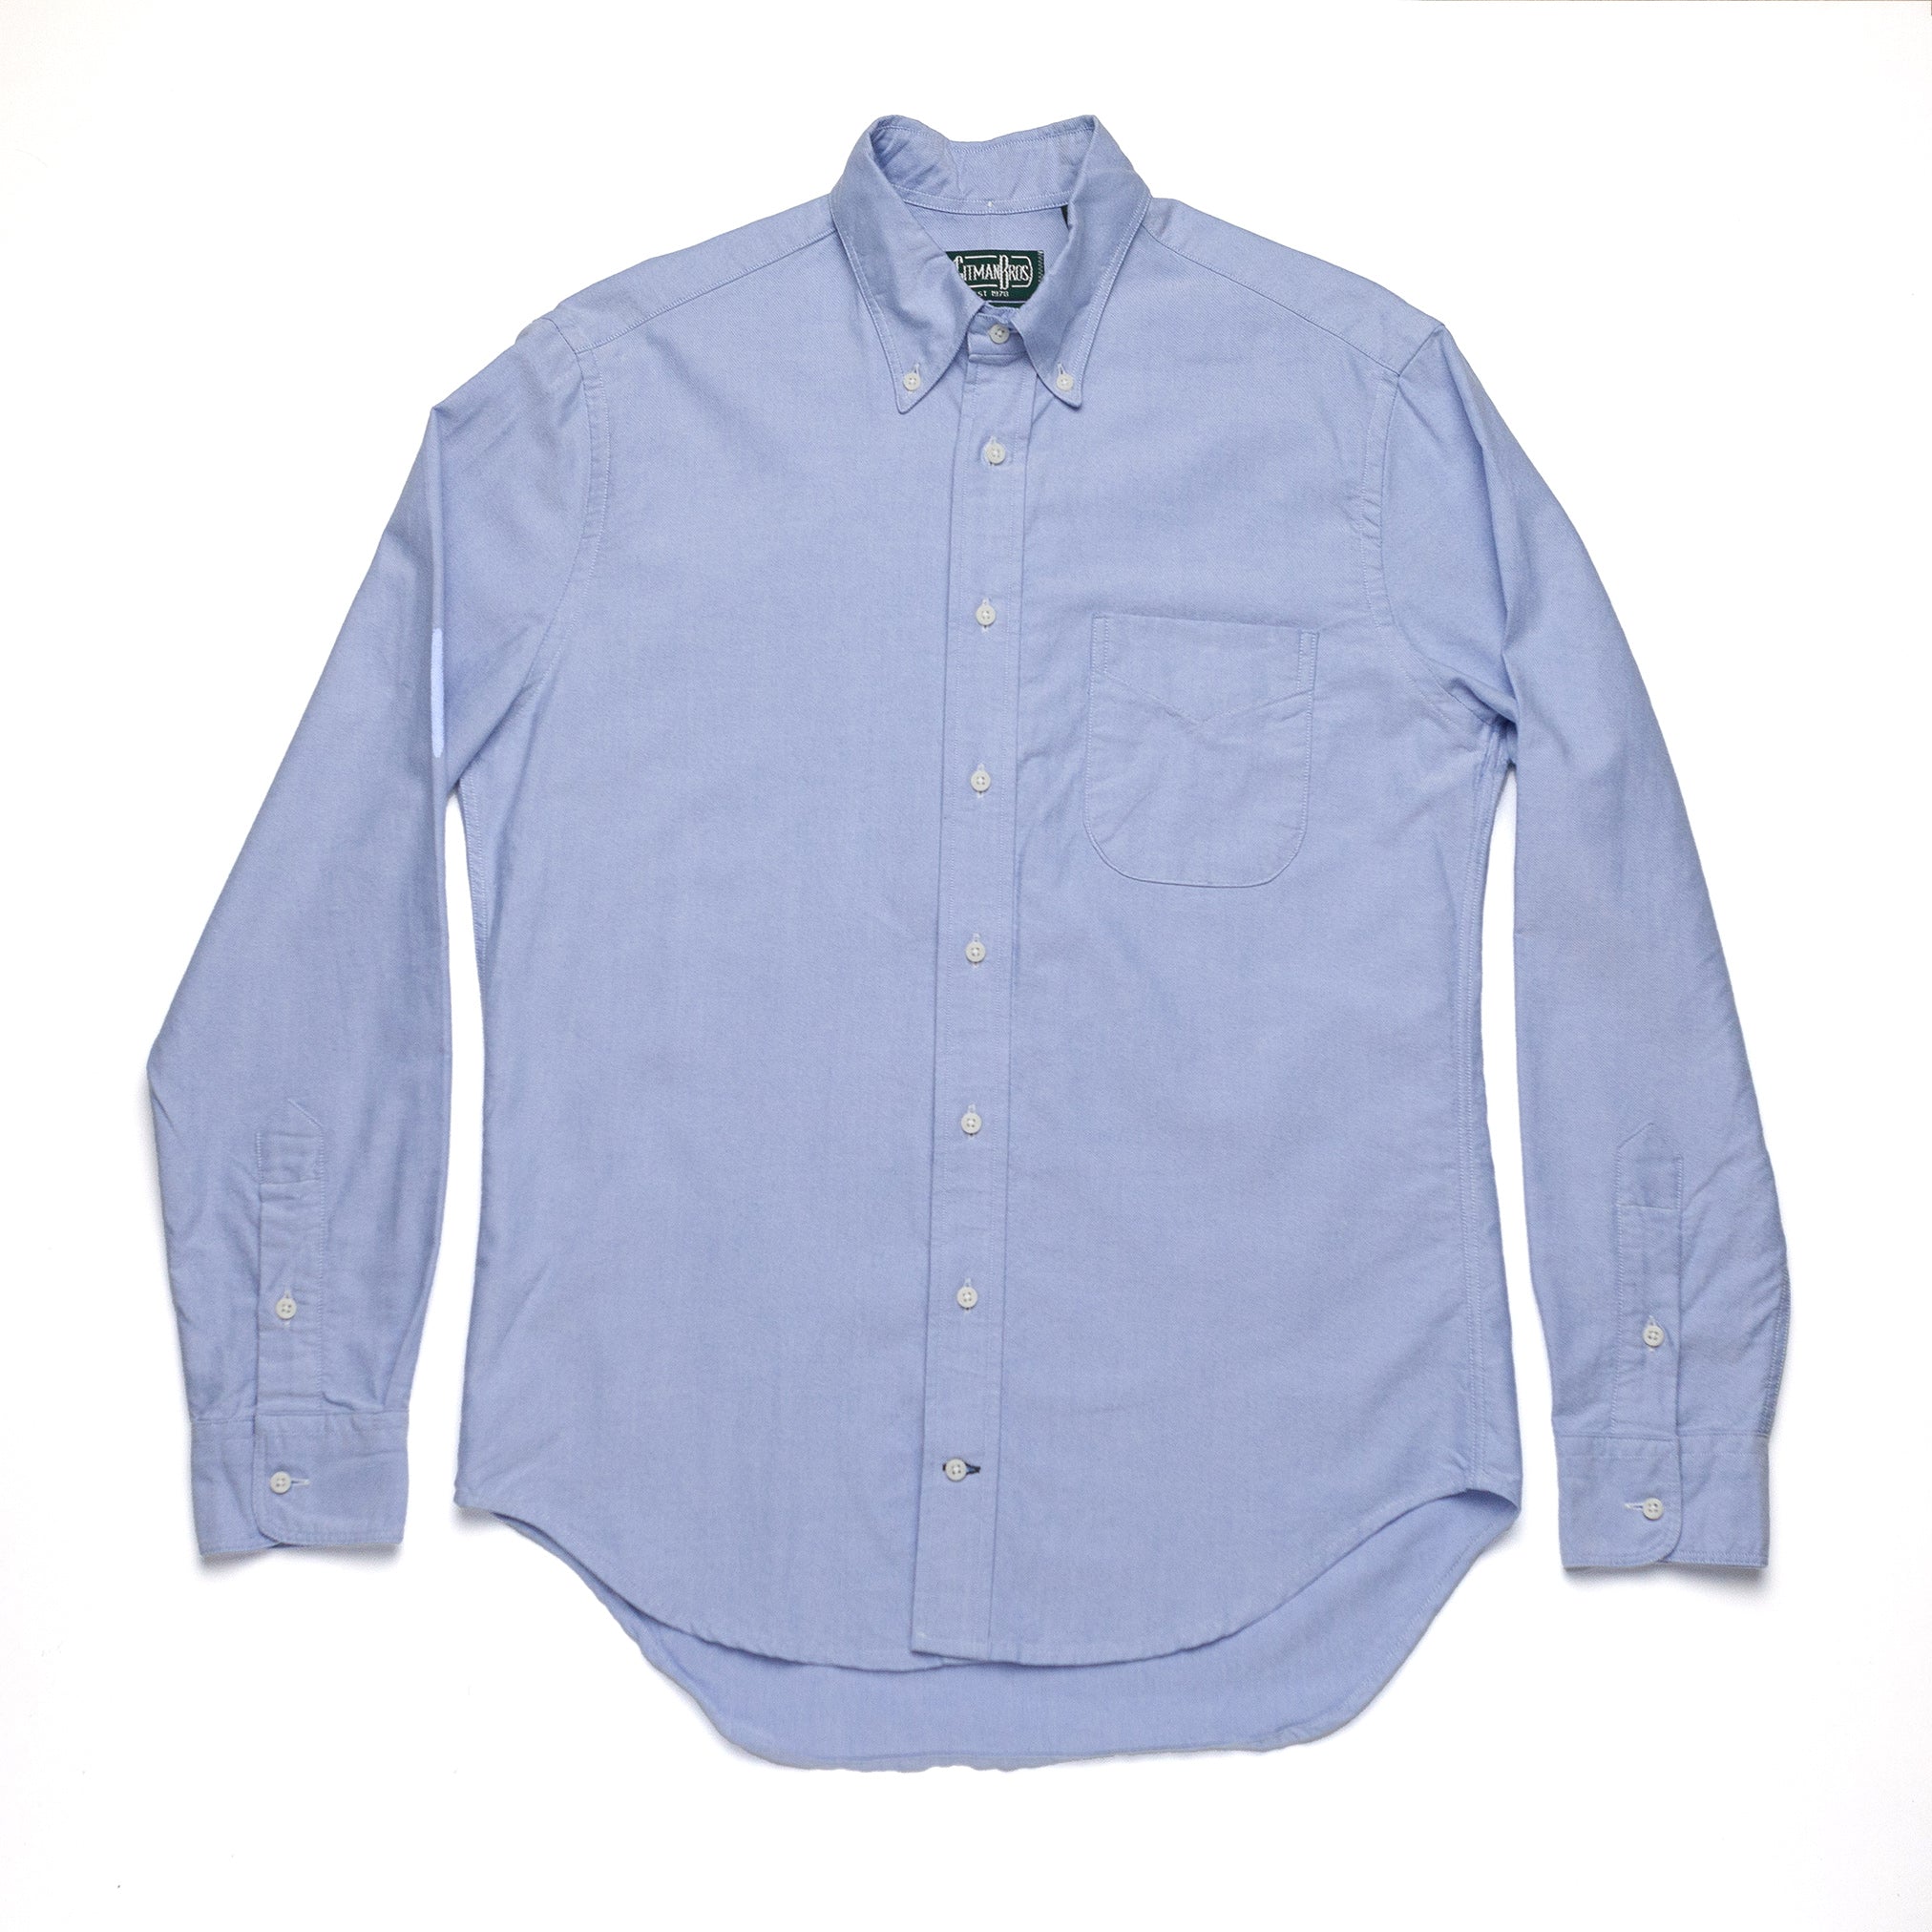 The Blue Oxford